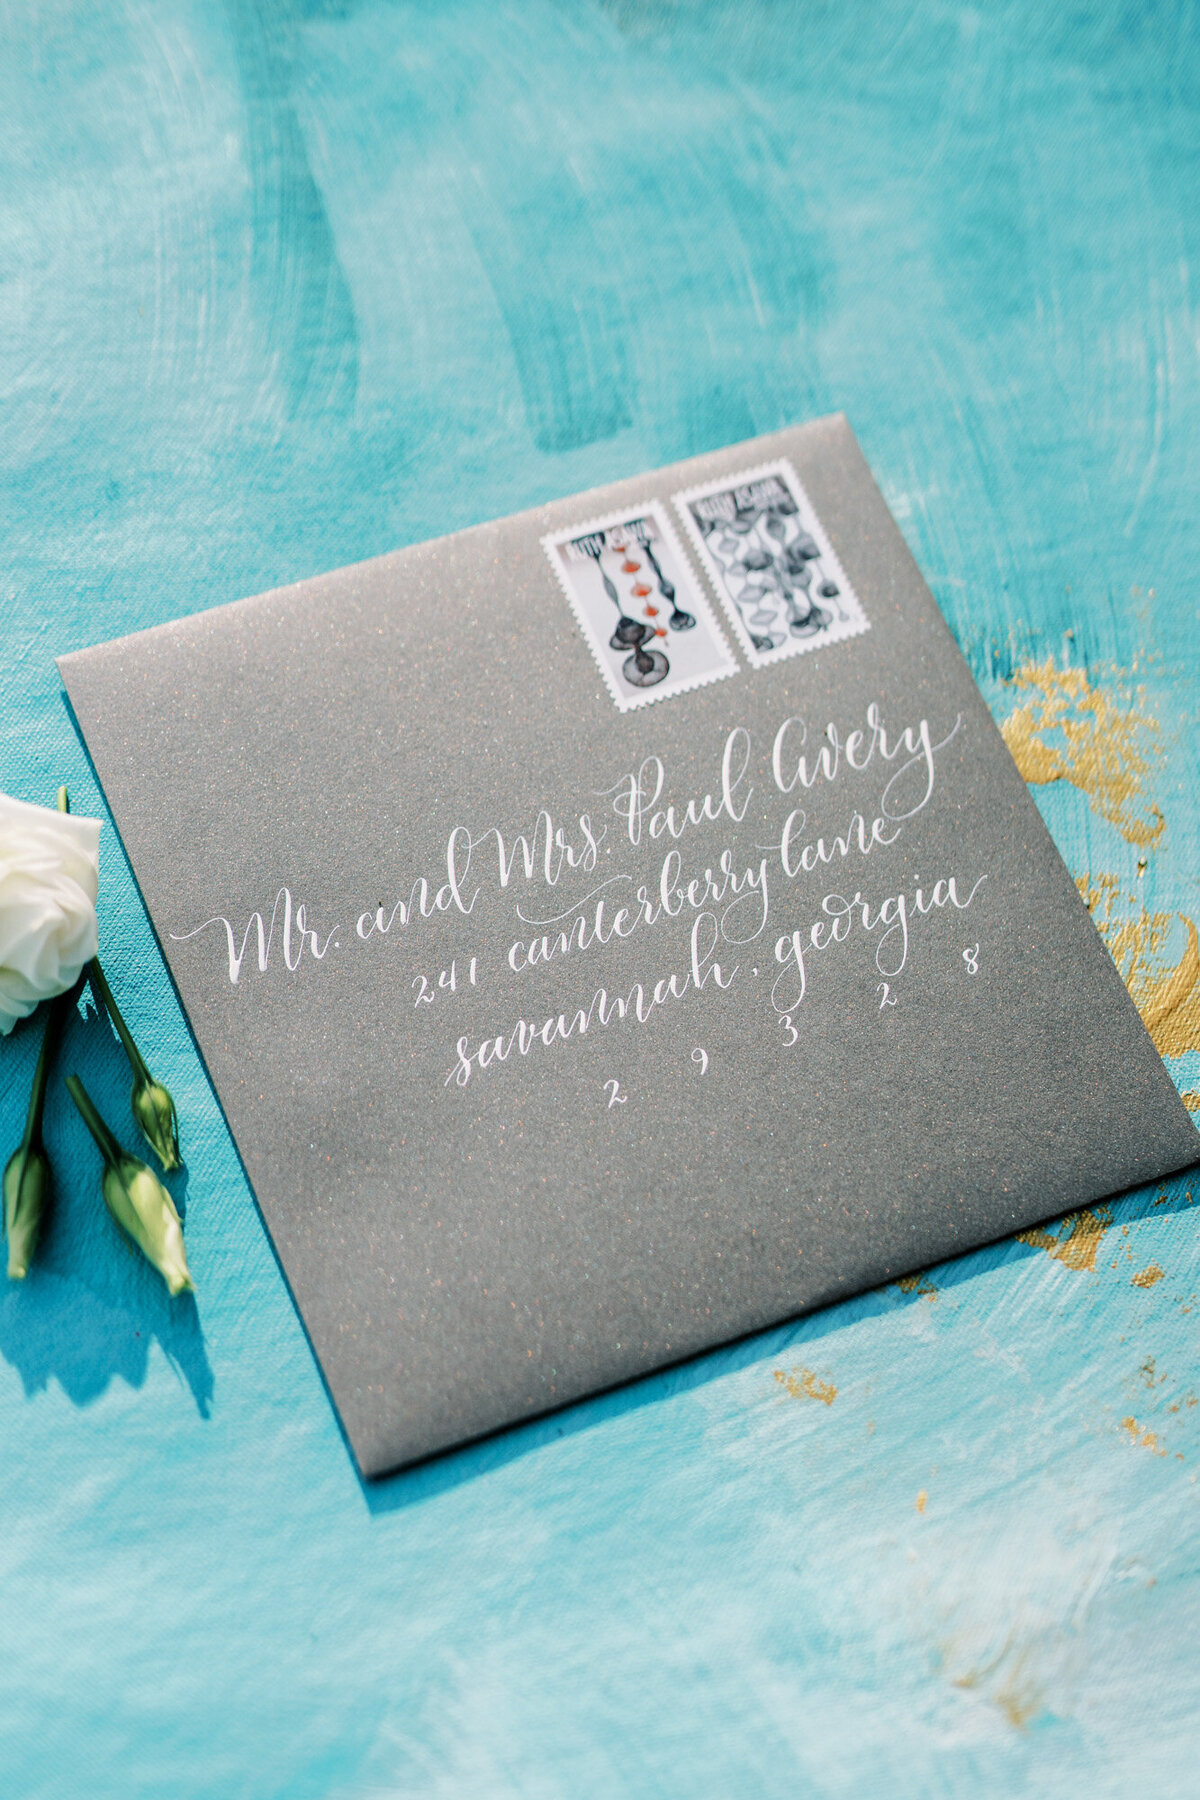 Black envelope with custom calligraphy with stamps